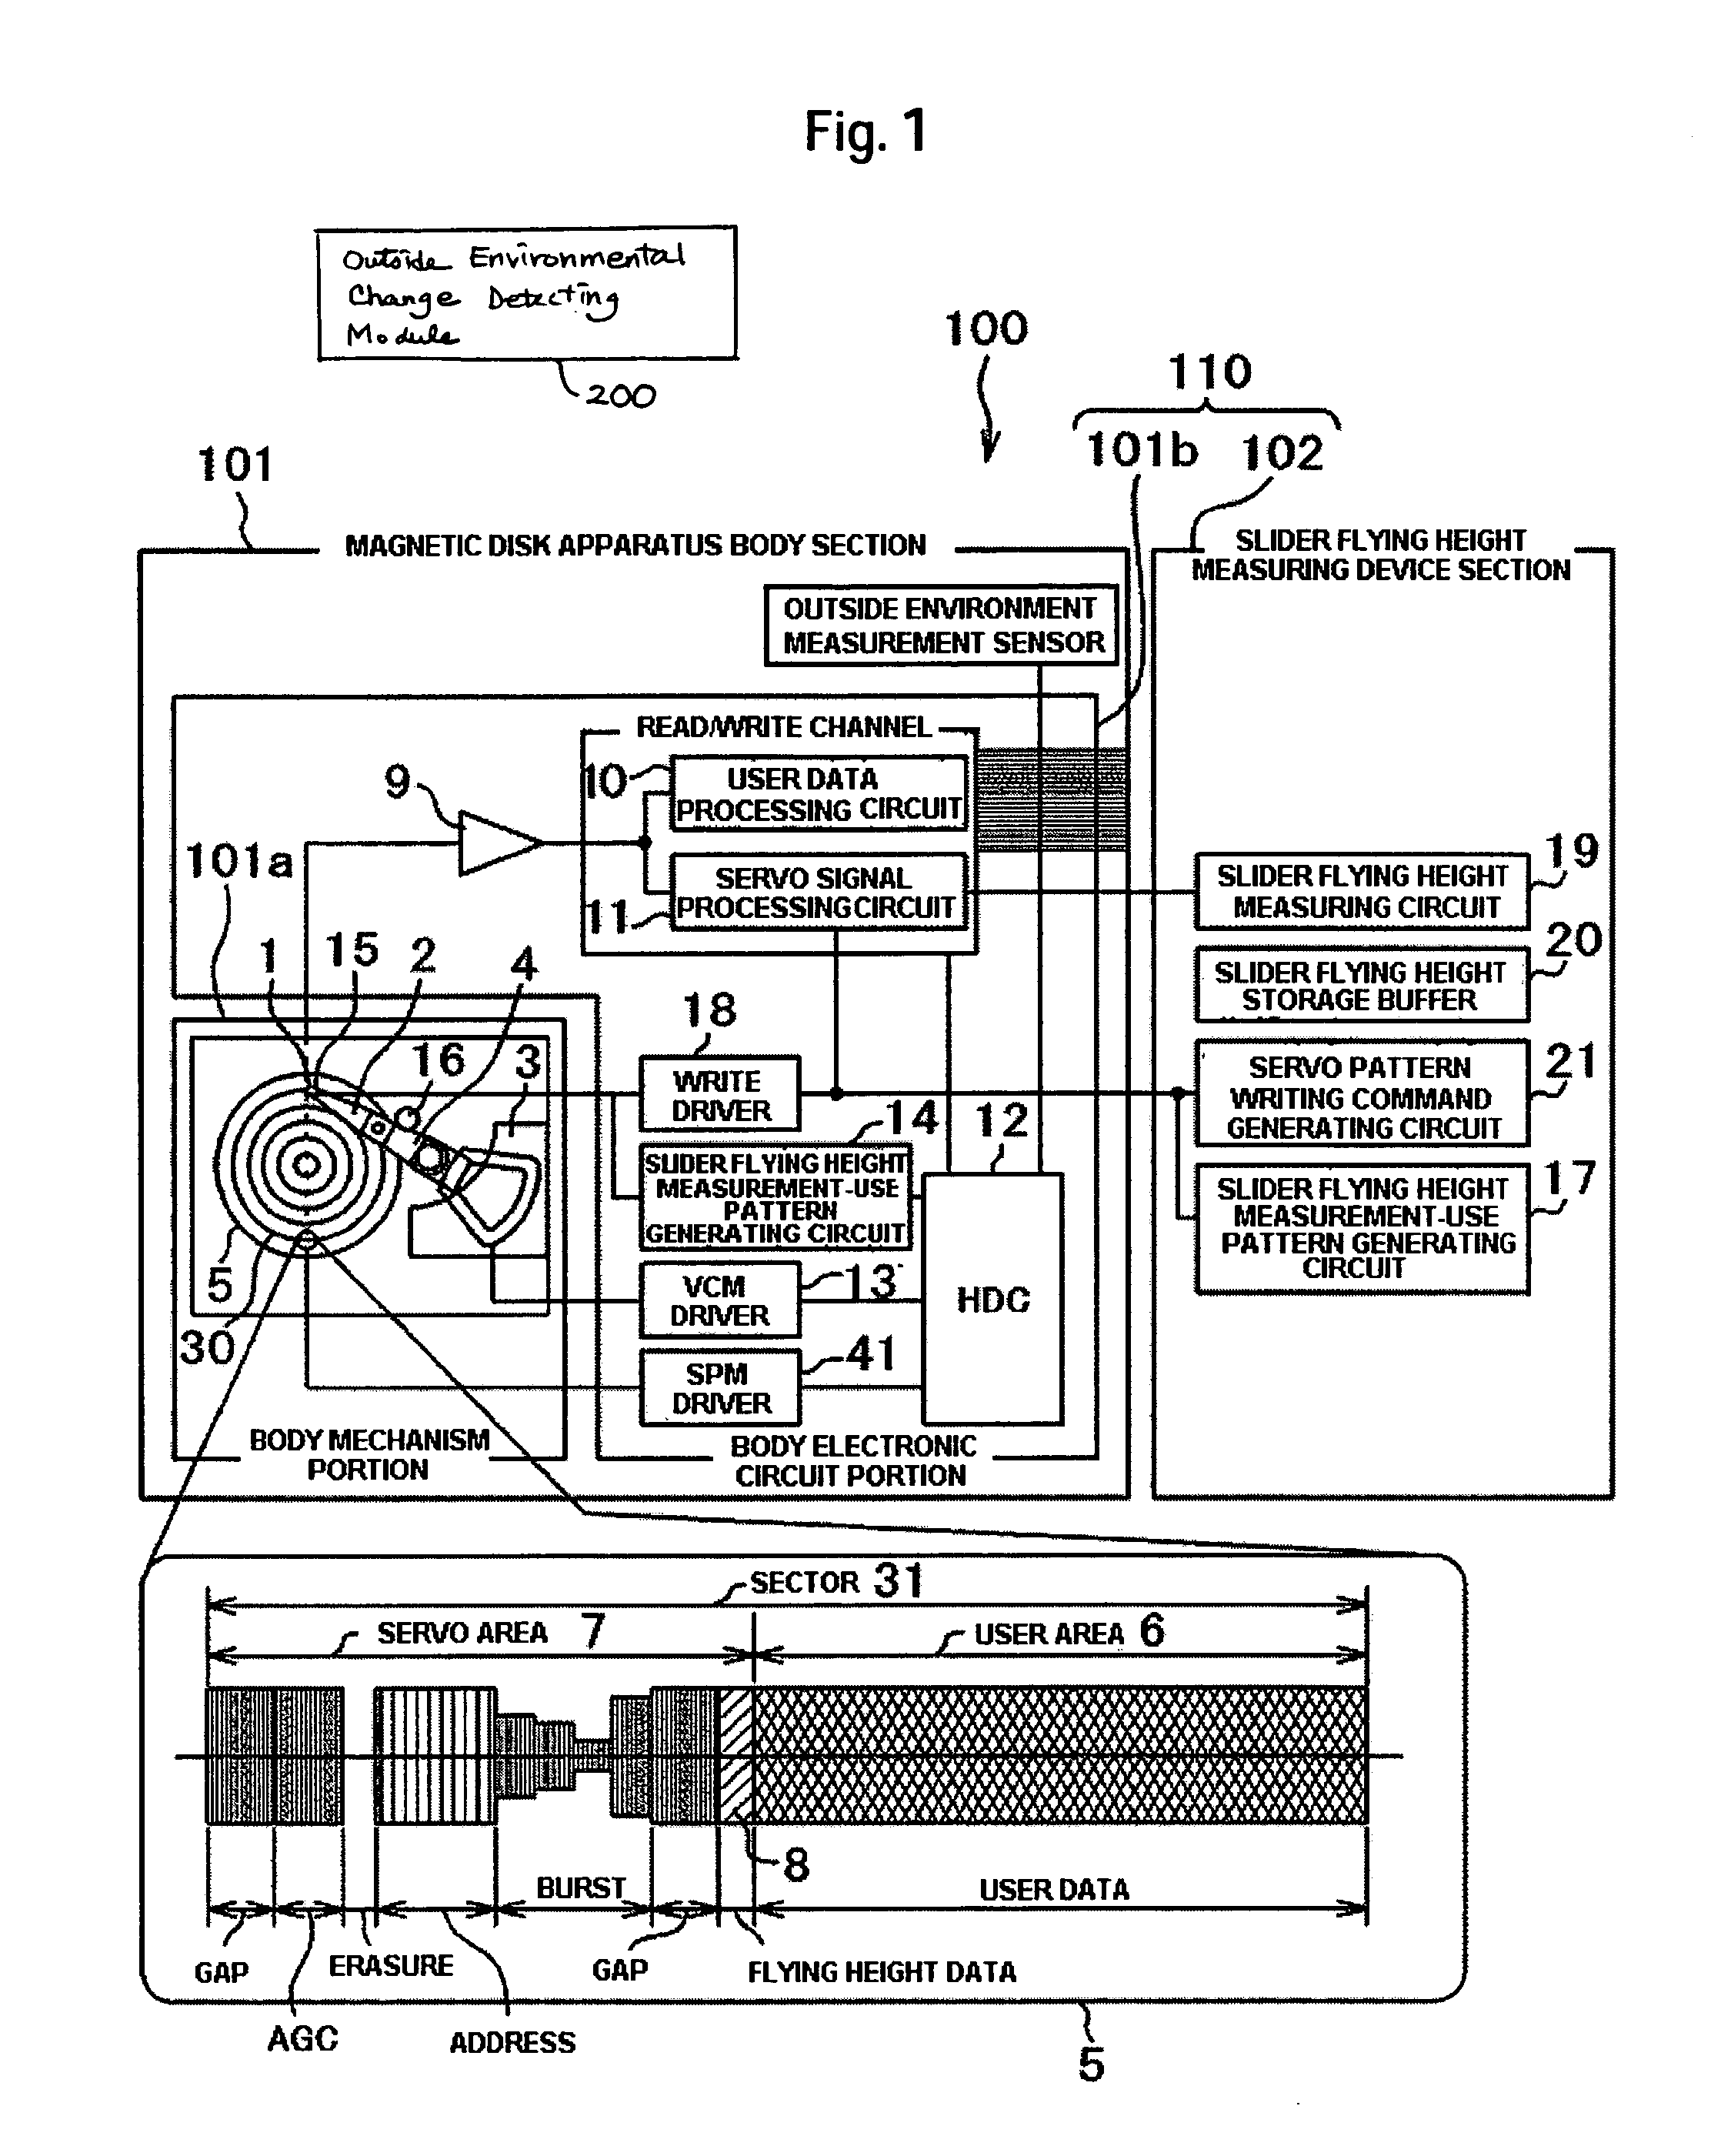 Controlling head flying height in a data storage device